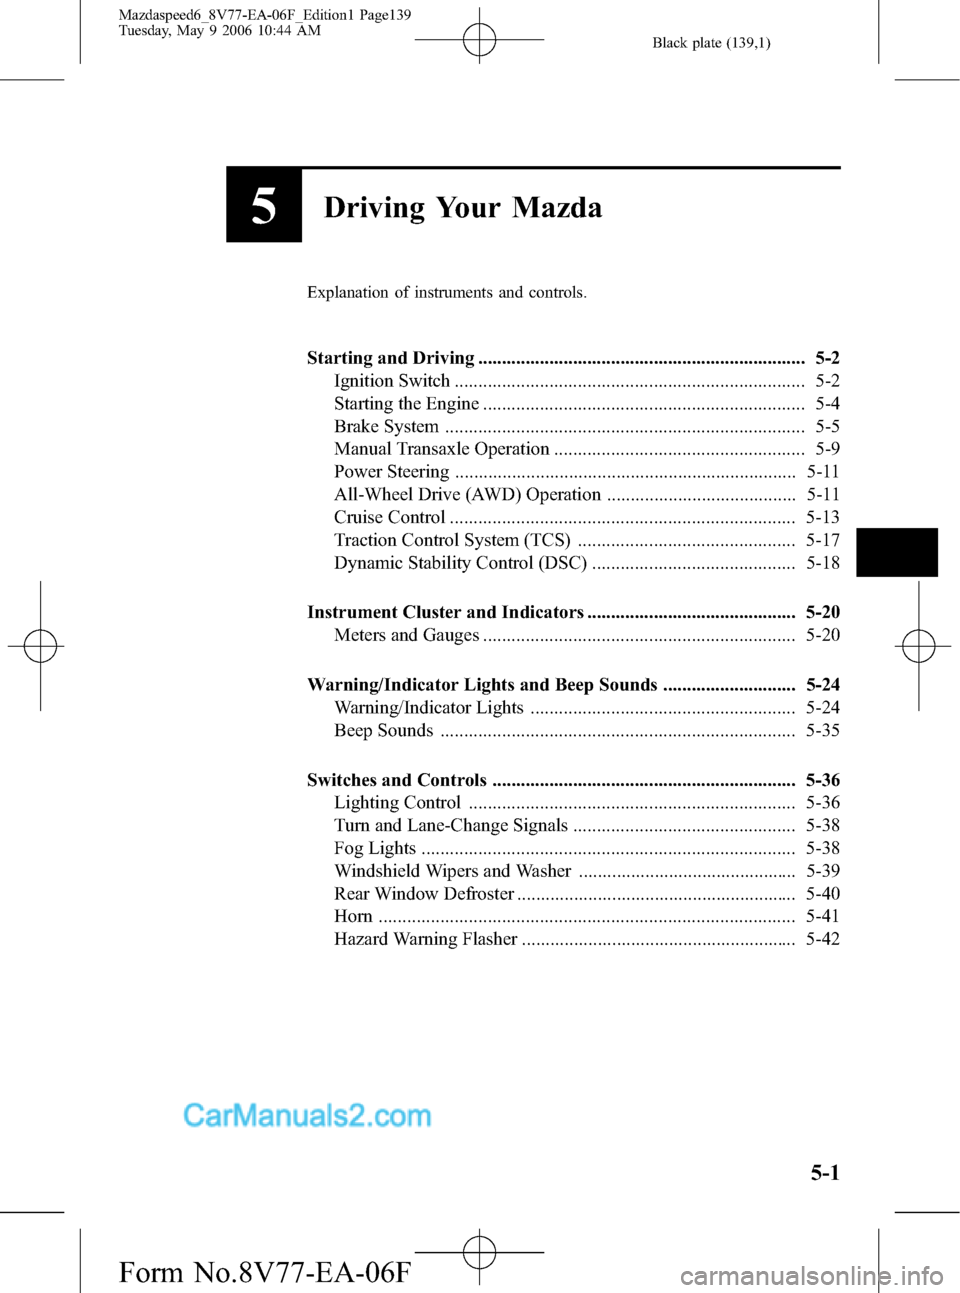 MAZDA MODEL MAZDASPEED 6 2007  Owners Manual (in English) Black plate (139,1)
5Driving Your Mazda
Explanation of instruments and controls.
Starting and Driving ..................................................................... 5-2
Ignition Switch ........